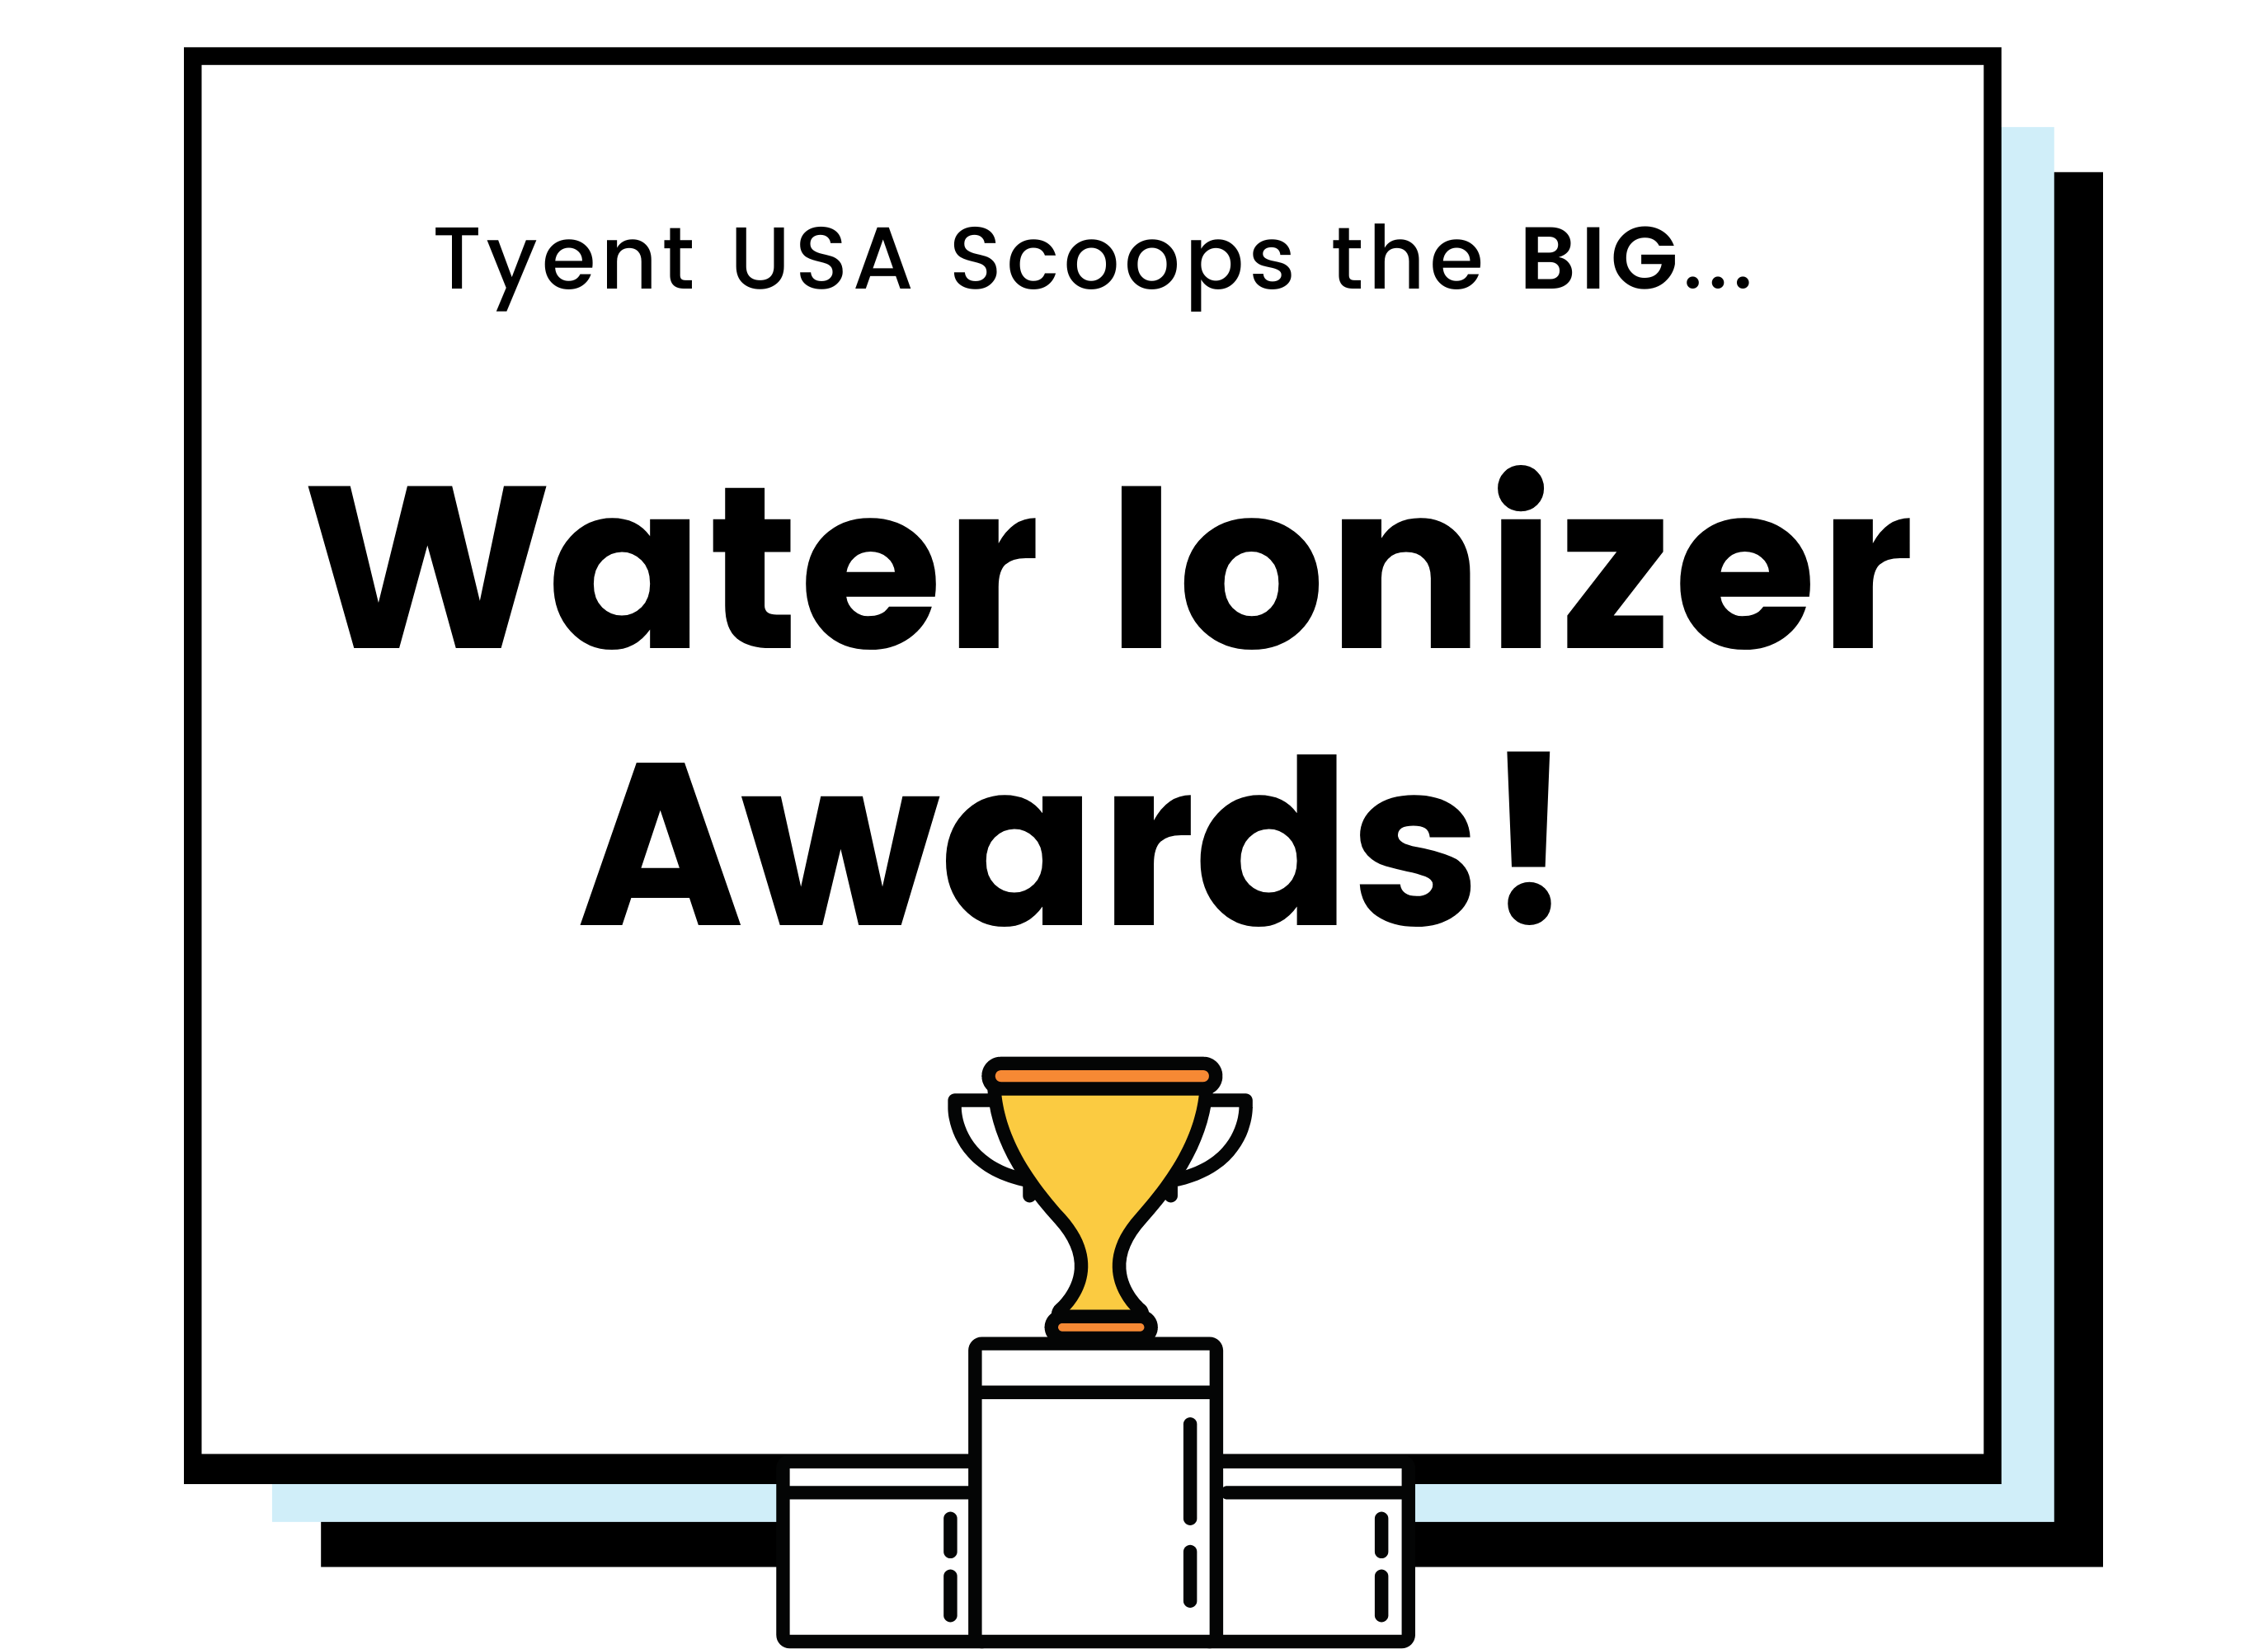 Tyent Scoops the Big Water Ionizer Awards